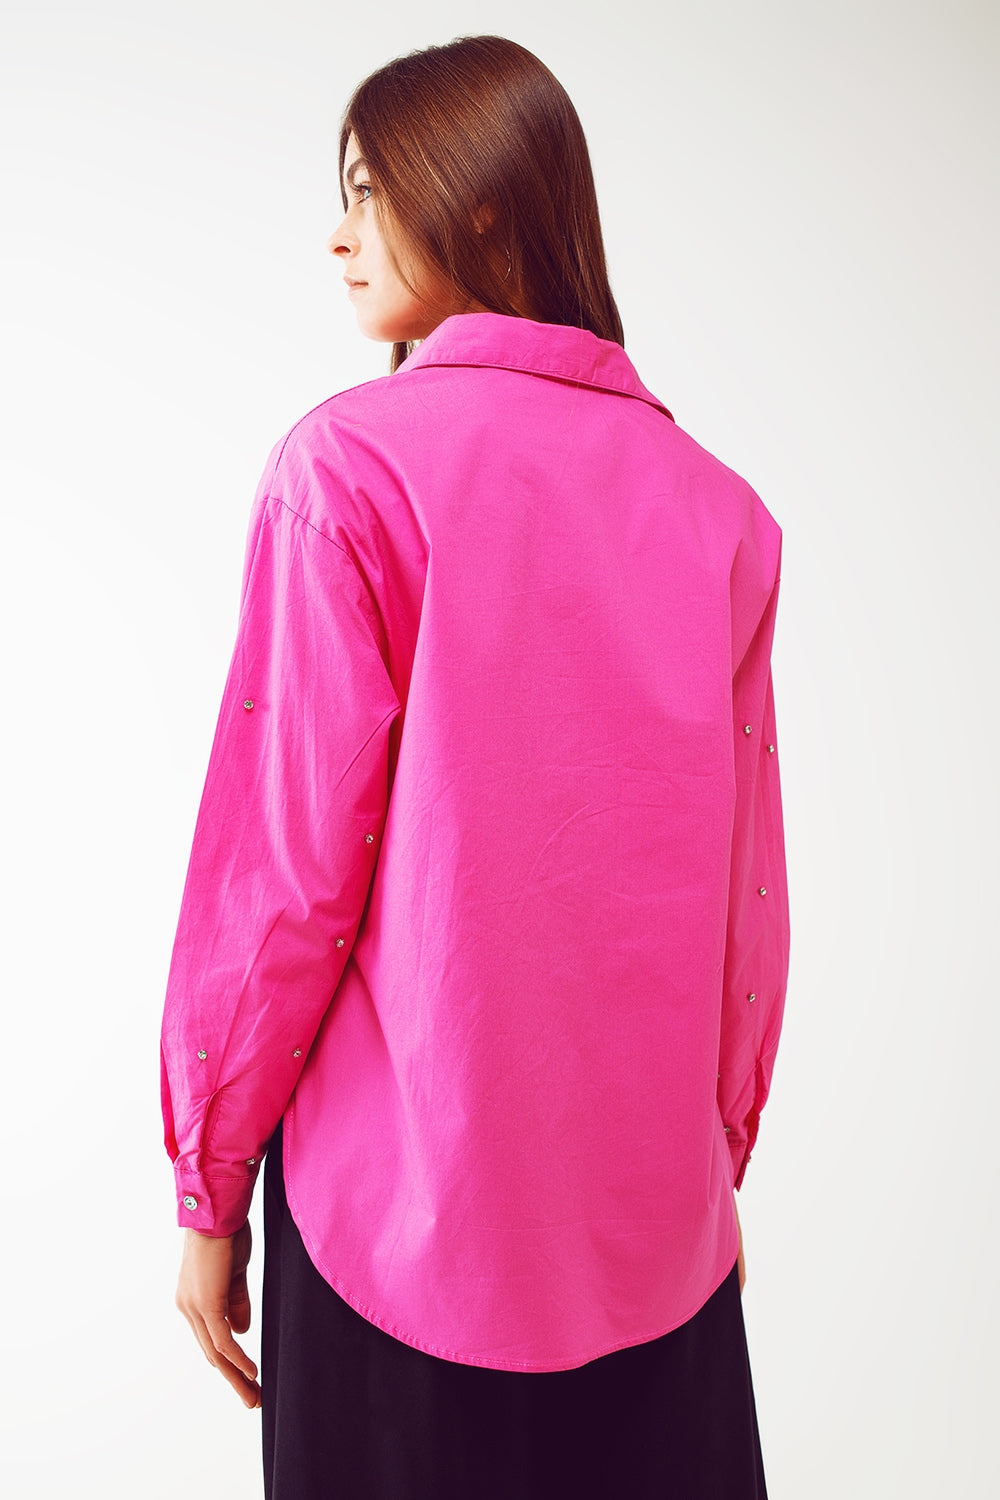 EMBELLISHED SHIRT WITH UNEVEN HEM IN FUCHSIA